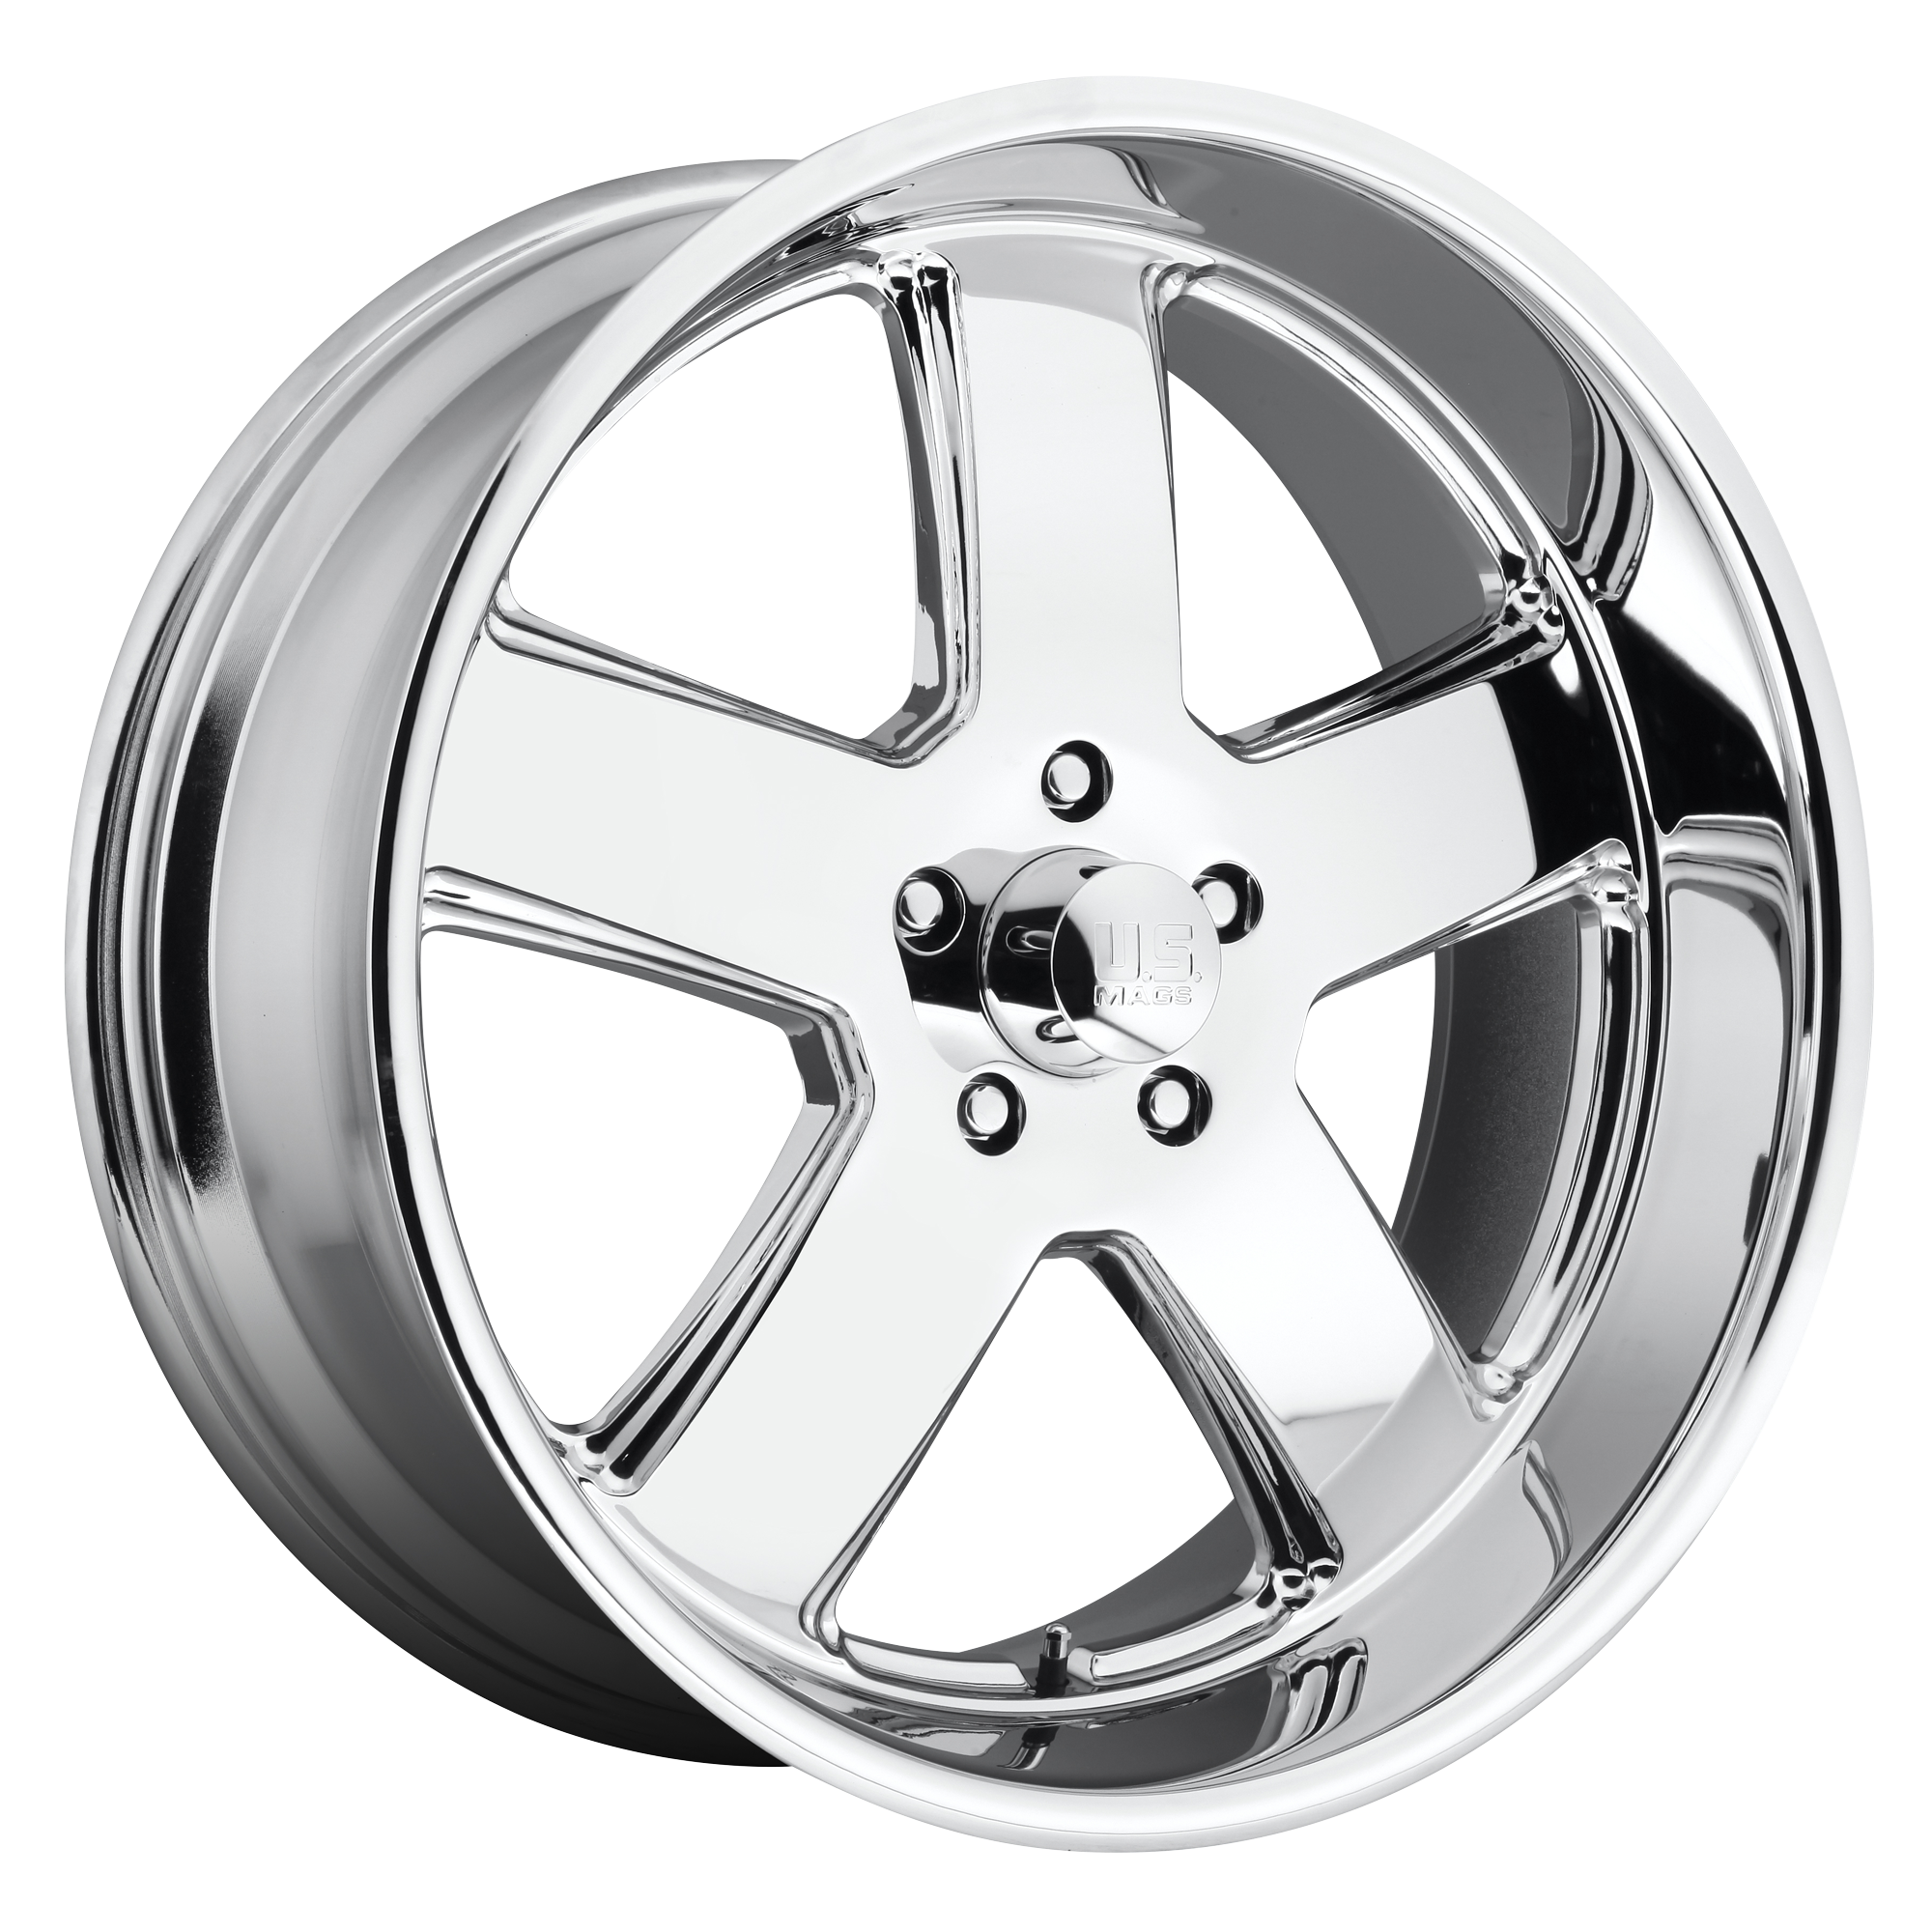 HUSTLER 20x9.5 5x127.00 CHROME PLATED (1 mm) - Tires and Engine Performance